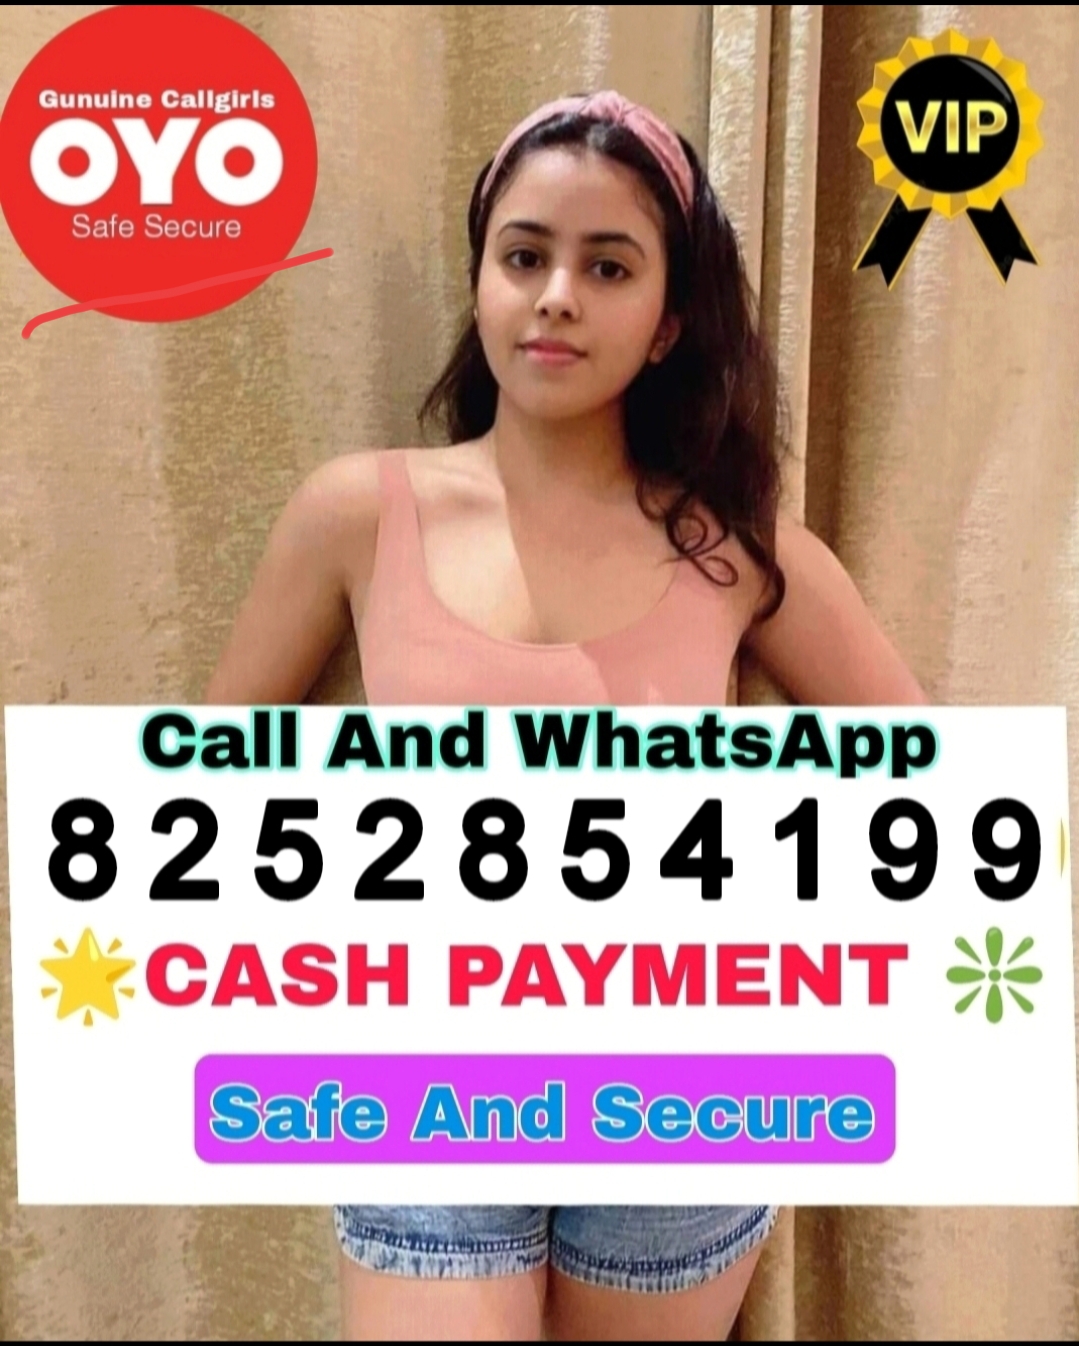 TODAY LOW PRICE  GENUINE CALL GIRL SAFE AND SECURE AVAILABLE  Acjdncu